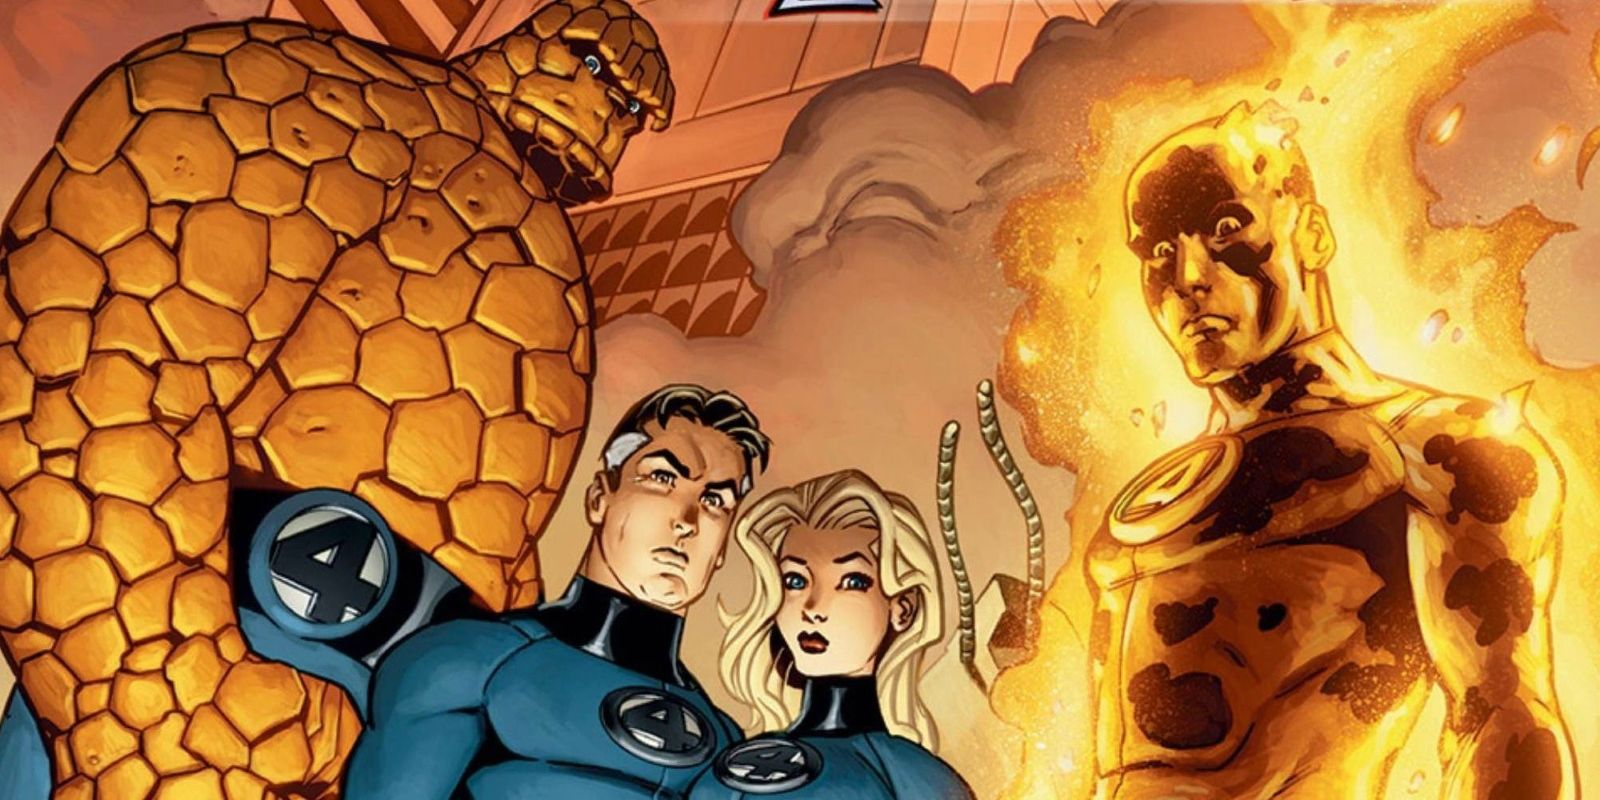 The Fantastic Four (Thing, Mr. Fantastic, Invisible Woman, & Human Torch) pose together